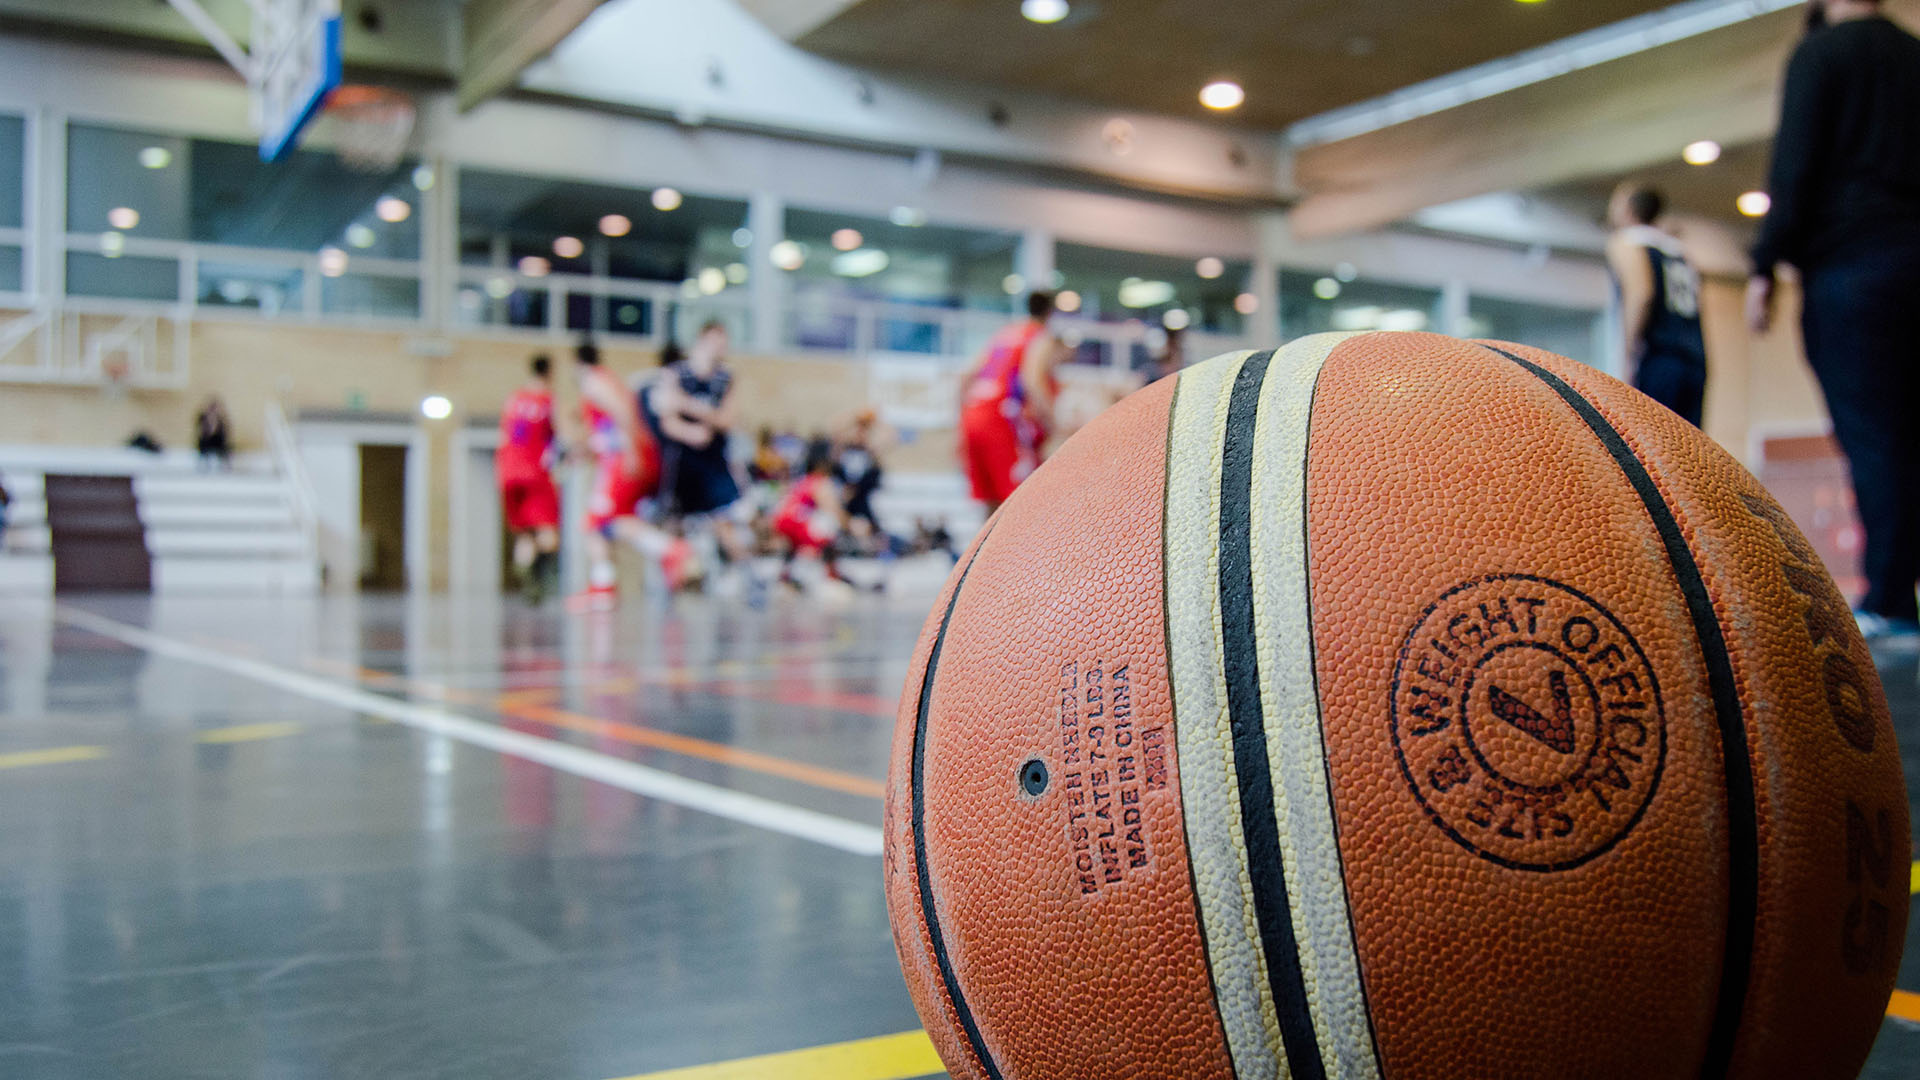 Connect with Community Basketball